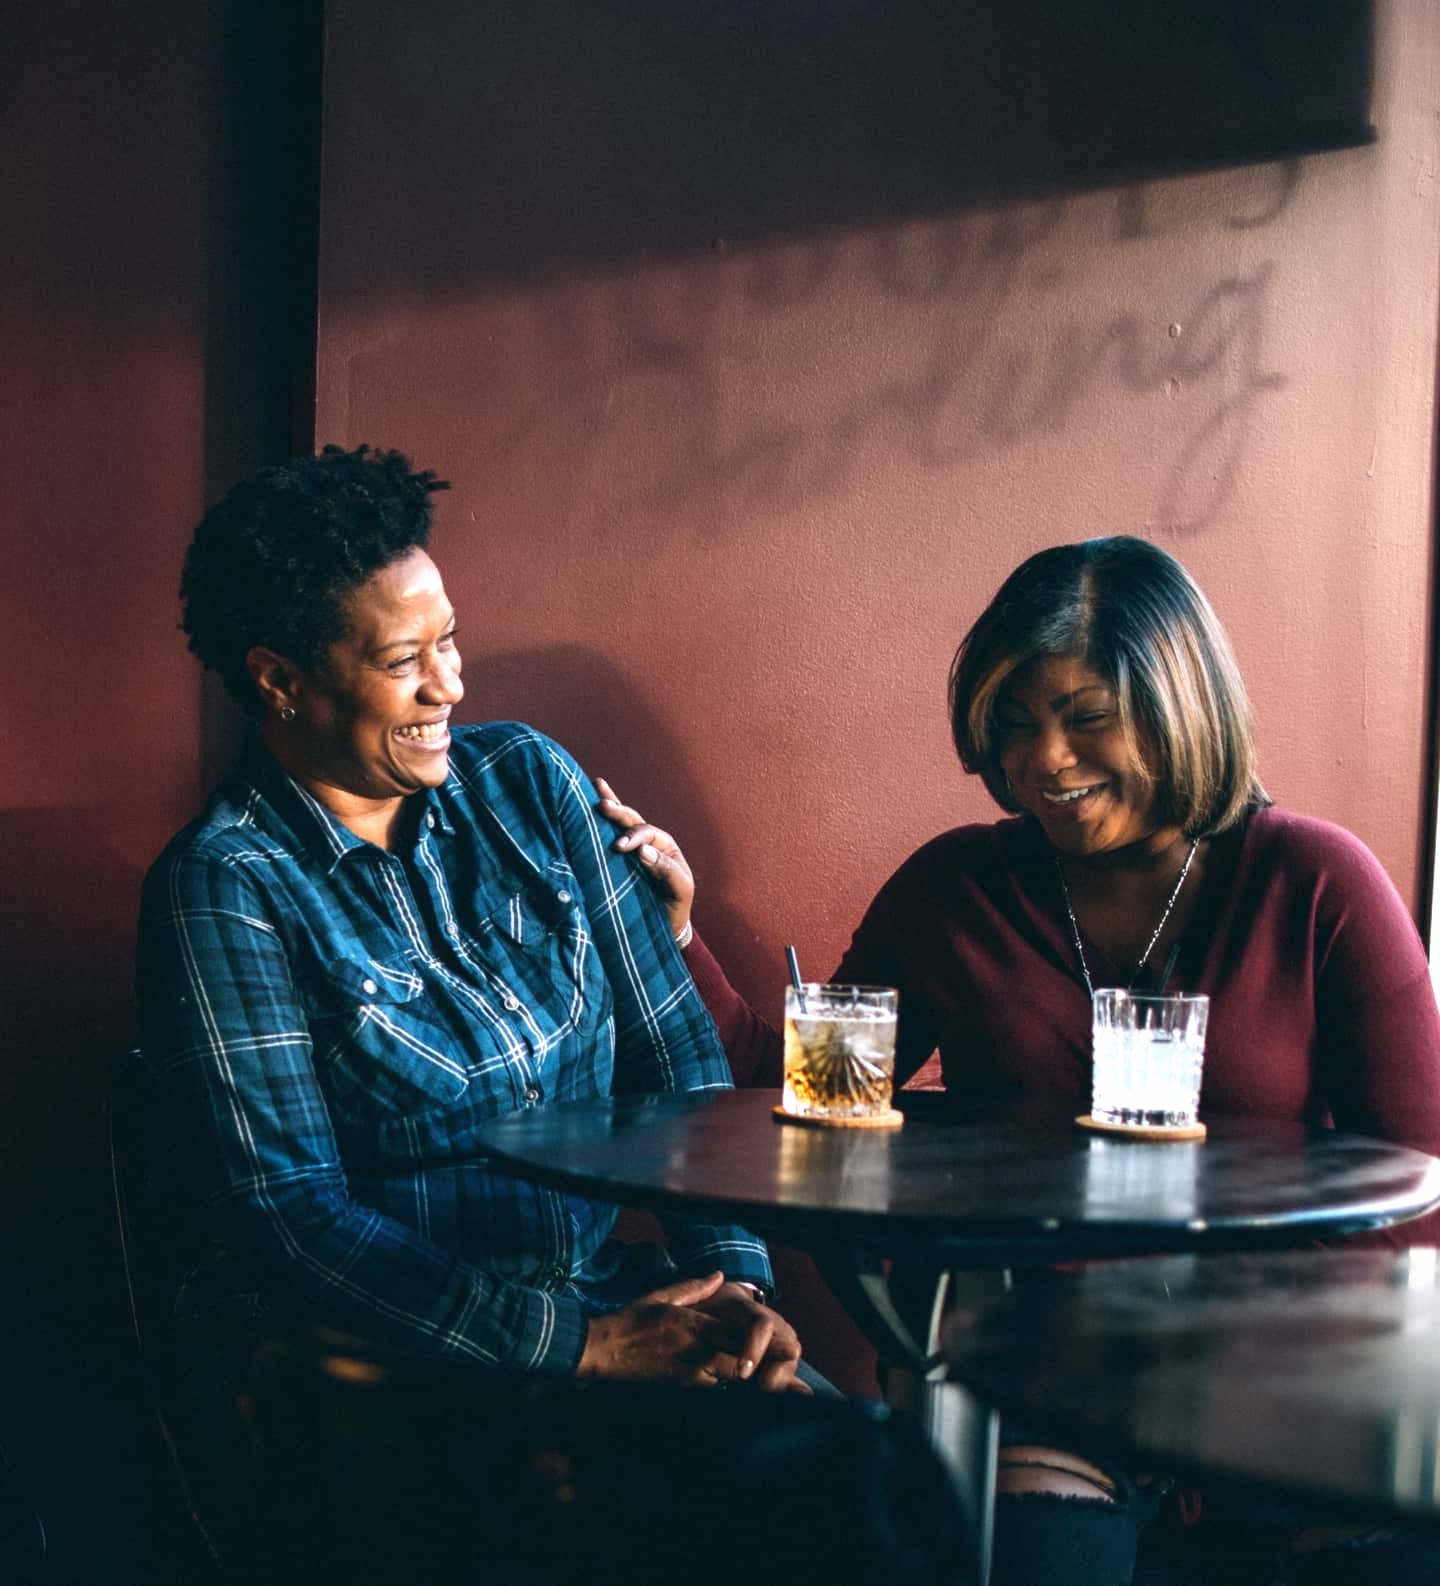 Angela Barnes and Renauda Riddle, the owners of Nobody's Darling (Photo Credit: Nobody's Darling Bar)